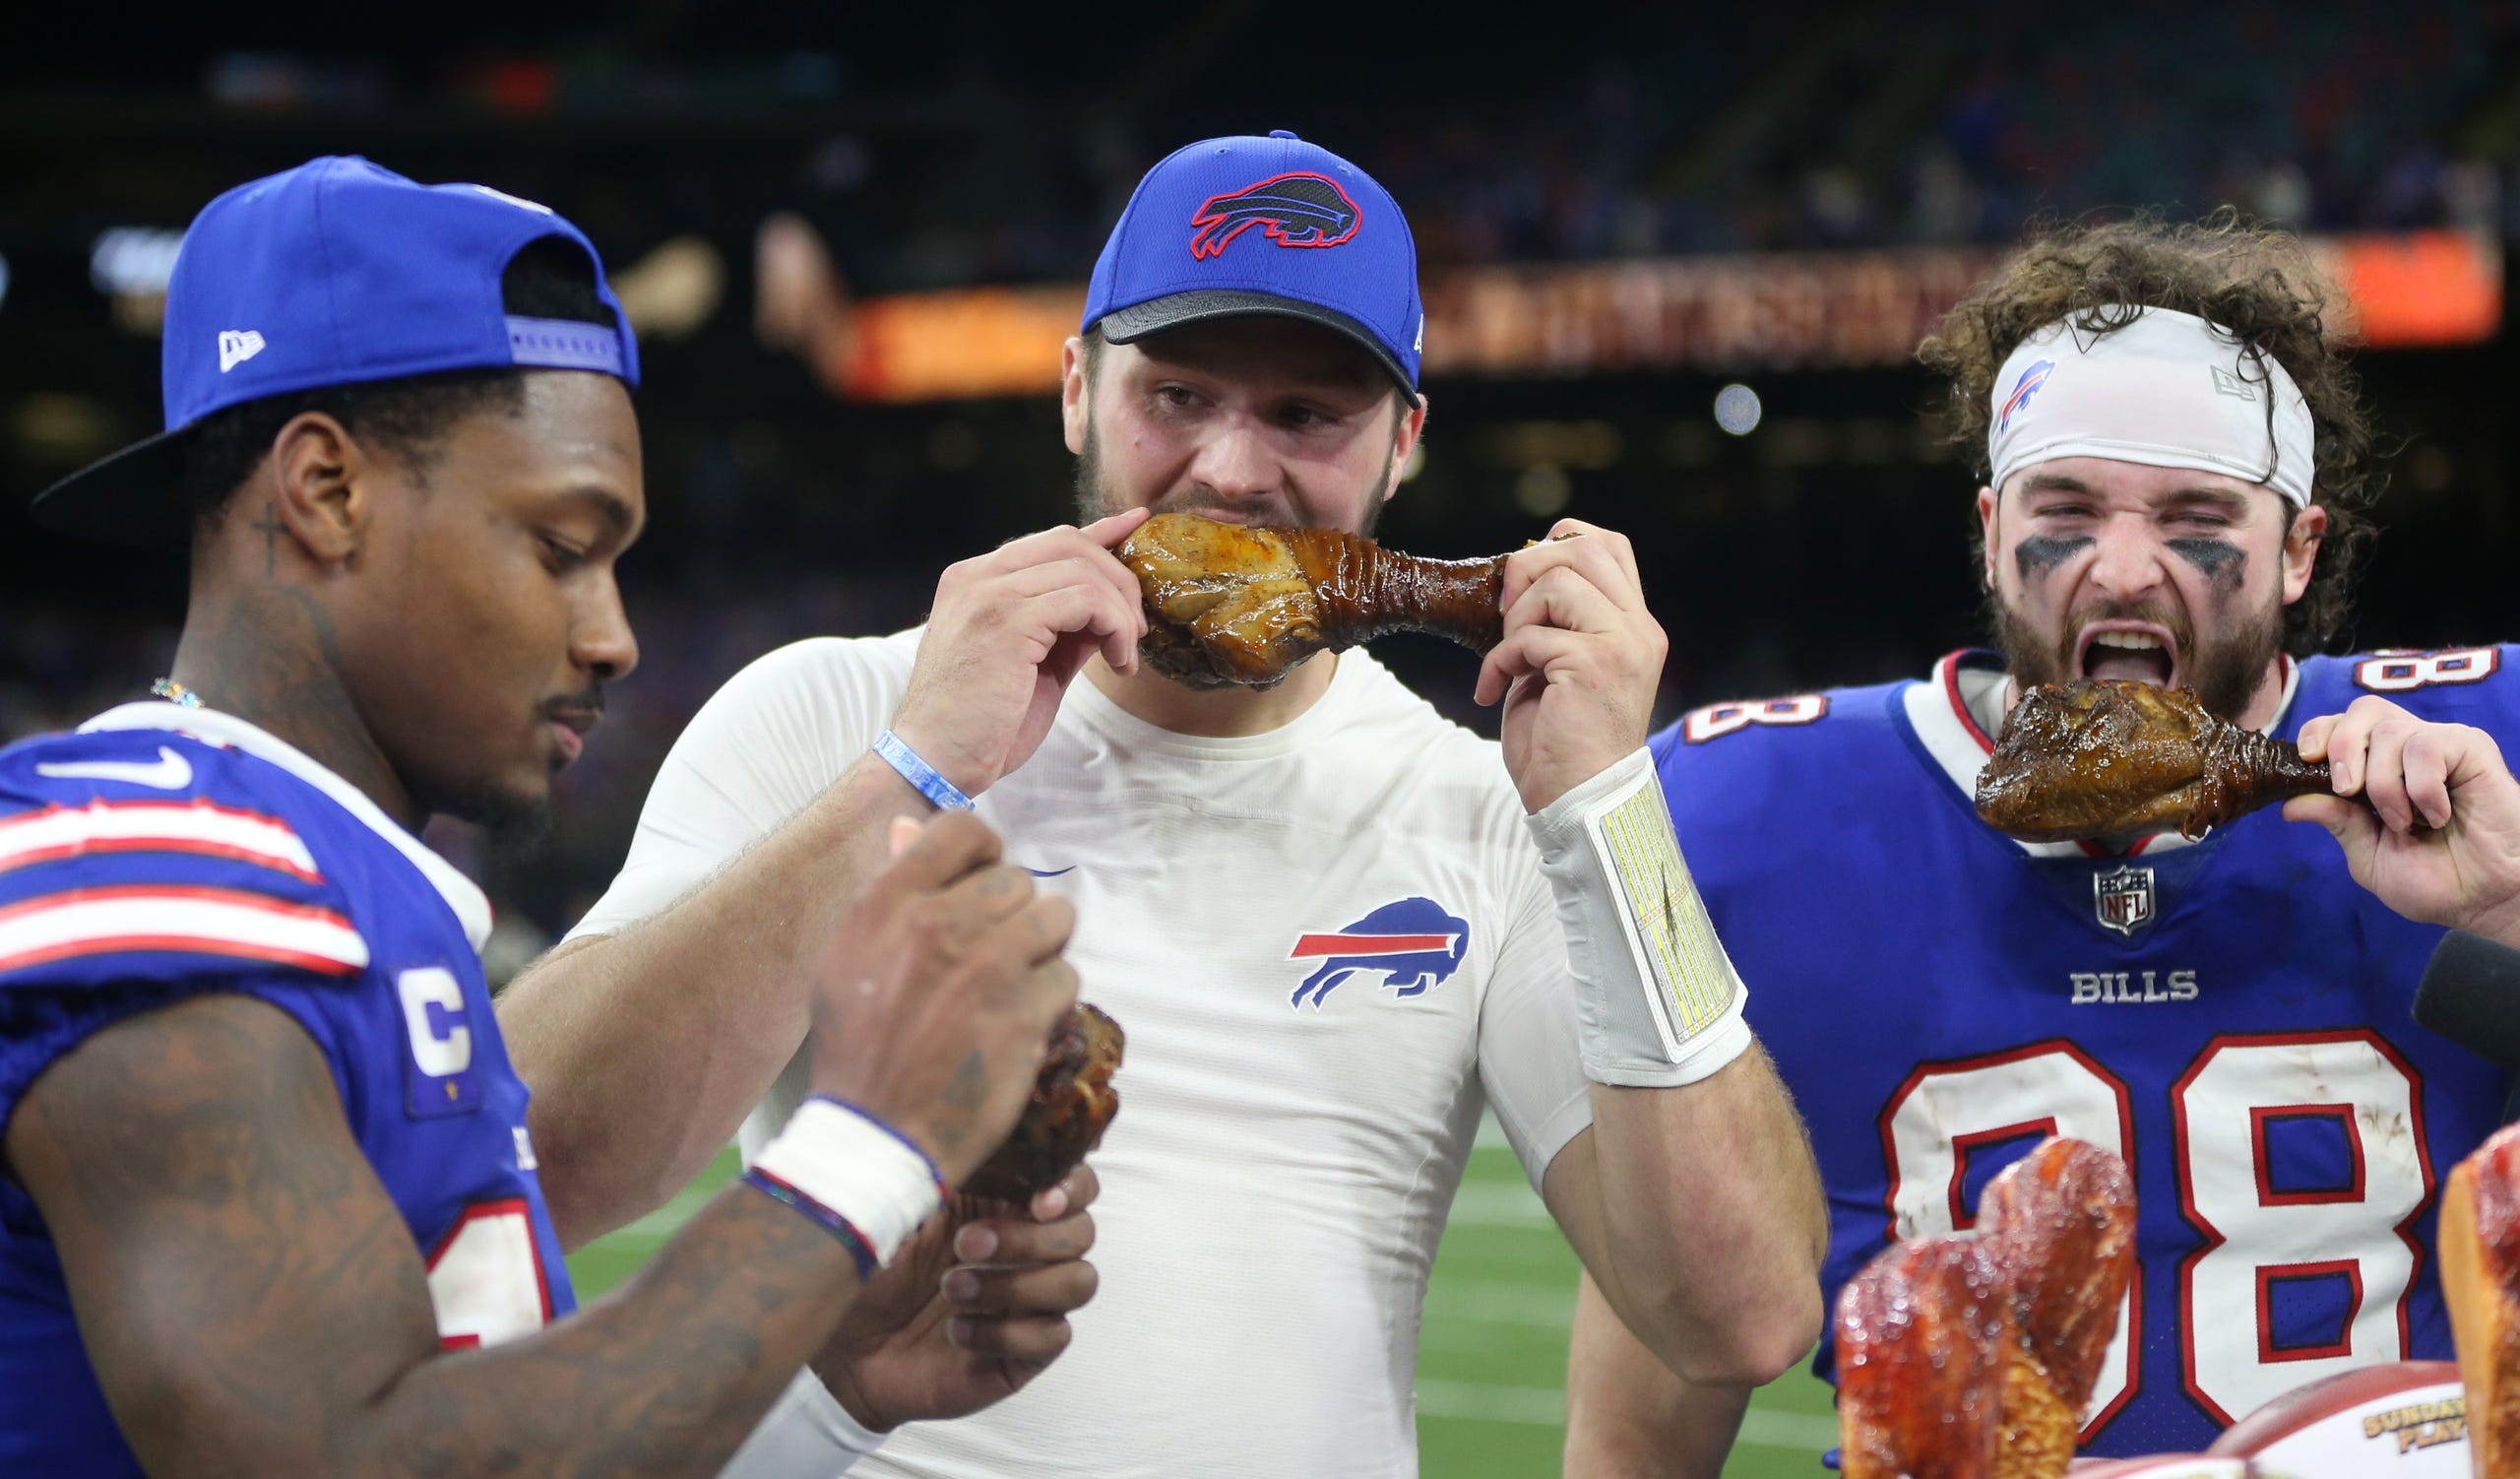 Three Buffalo Bills players eat turkey after a Thanksgiving game against the Saints.